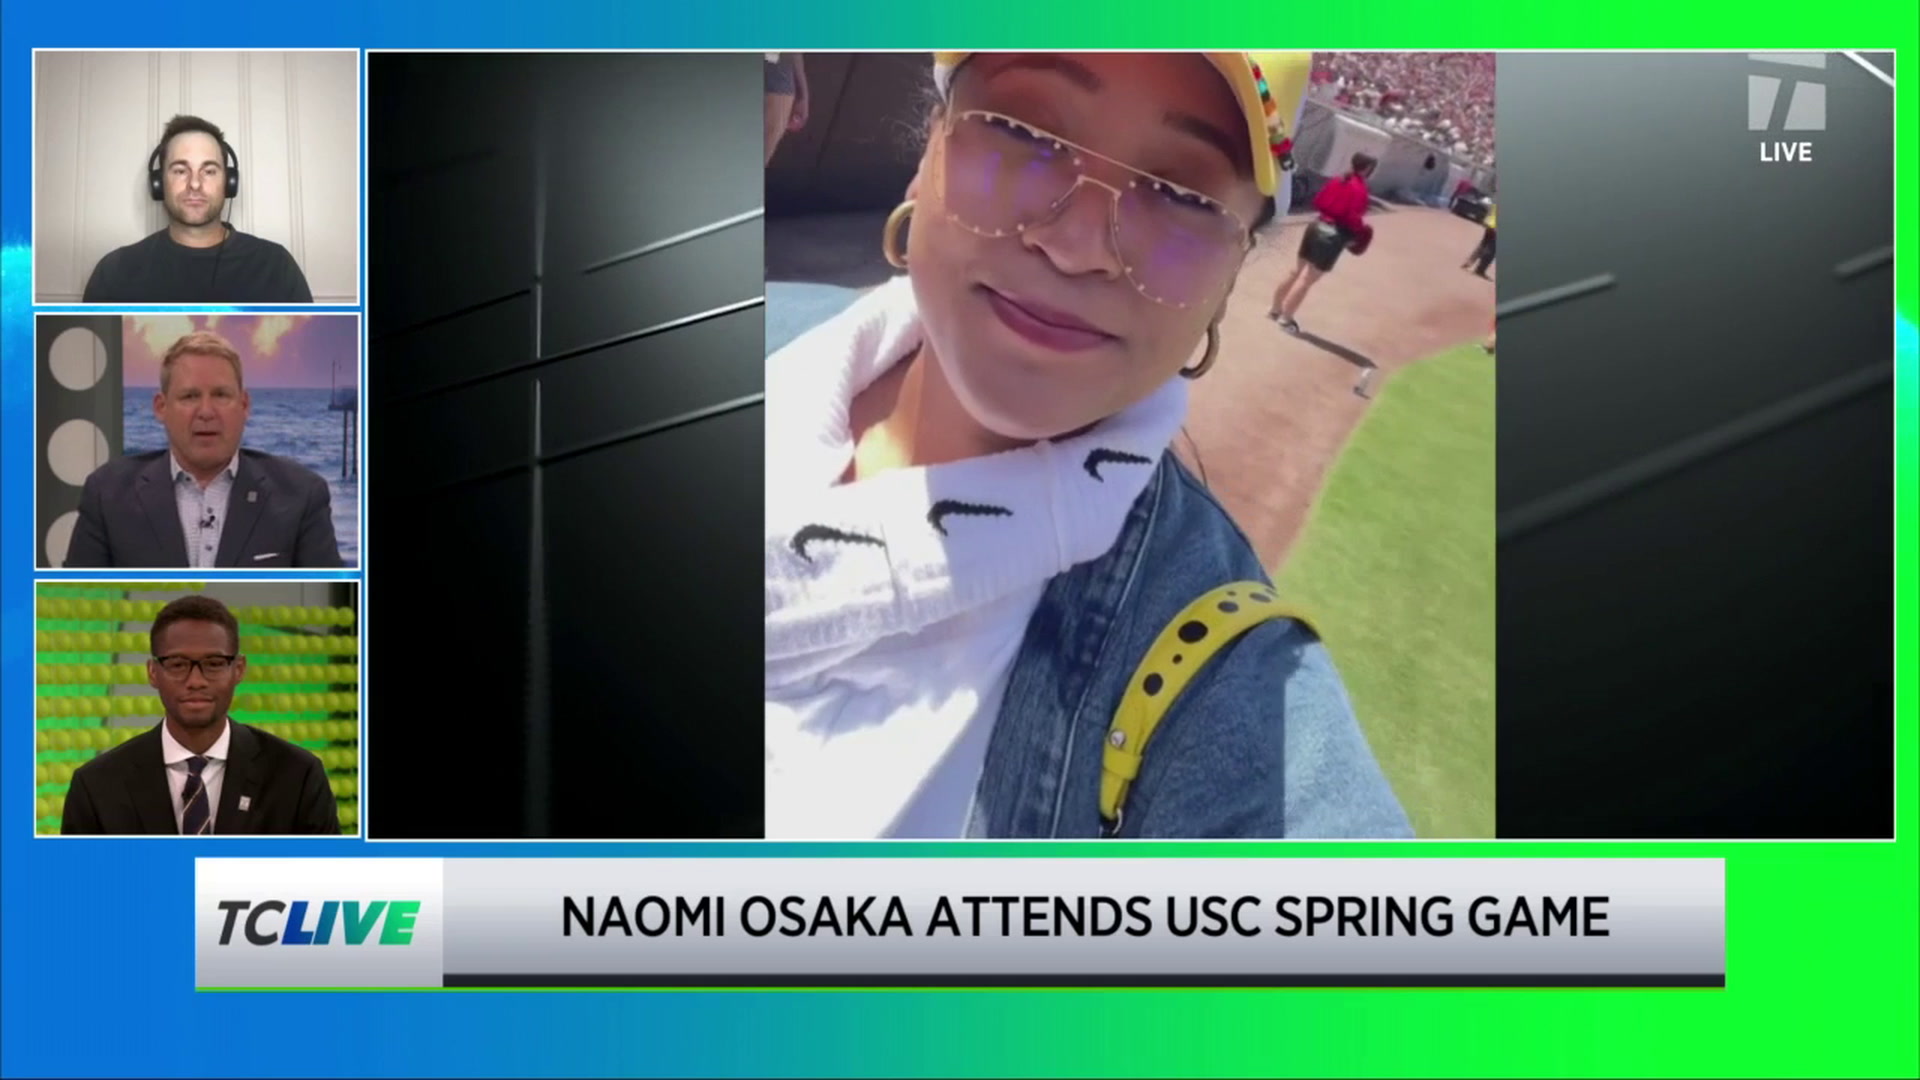 Naomi Osaka attends USC spring football game, and steps onto the tennis court with Chris Eubanks